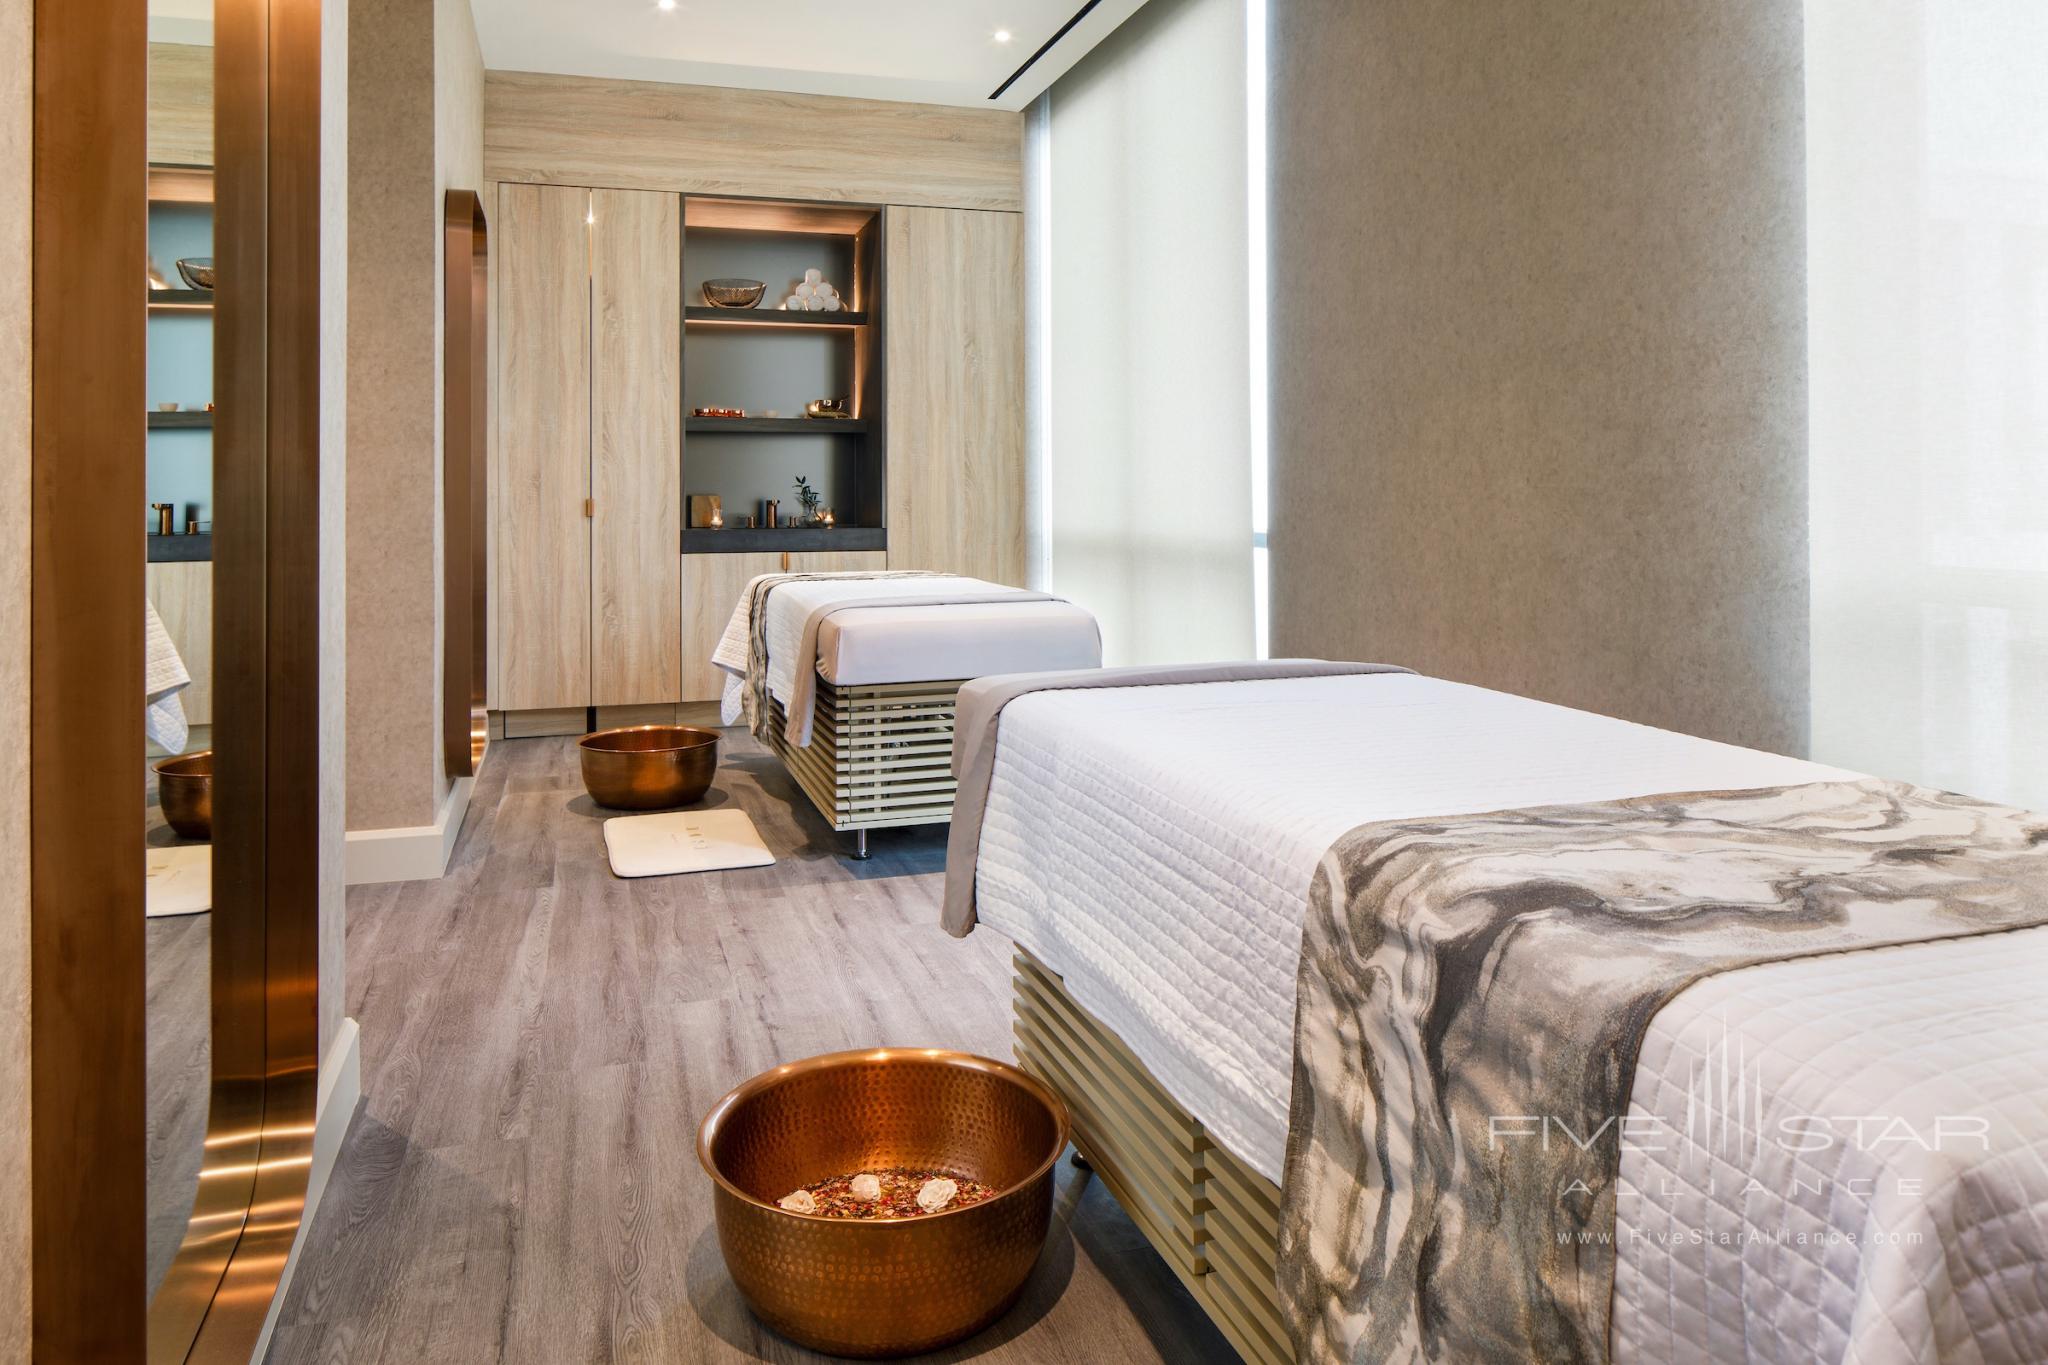 The couple's treatment room at Rose at The Joseph in Nashville features soothing massage tables and oversized copper bowls designed for a rose-infused welcome ritual.